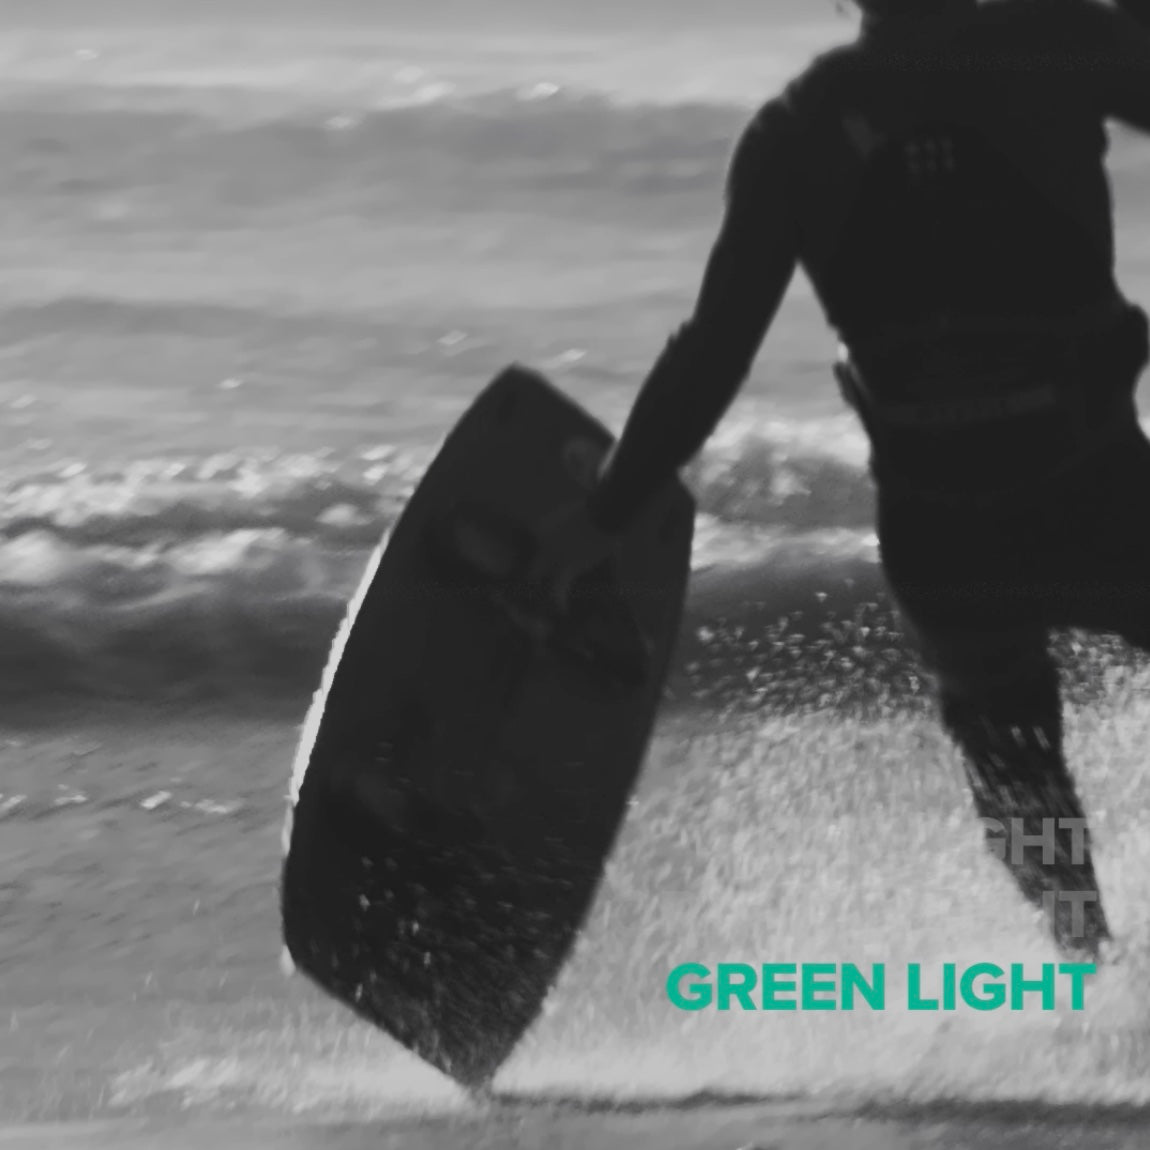 Green Light - the 2023 event is on!